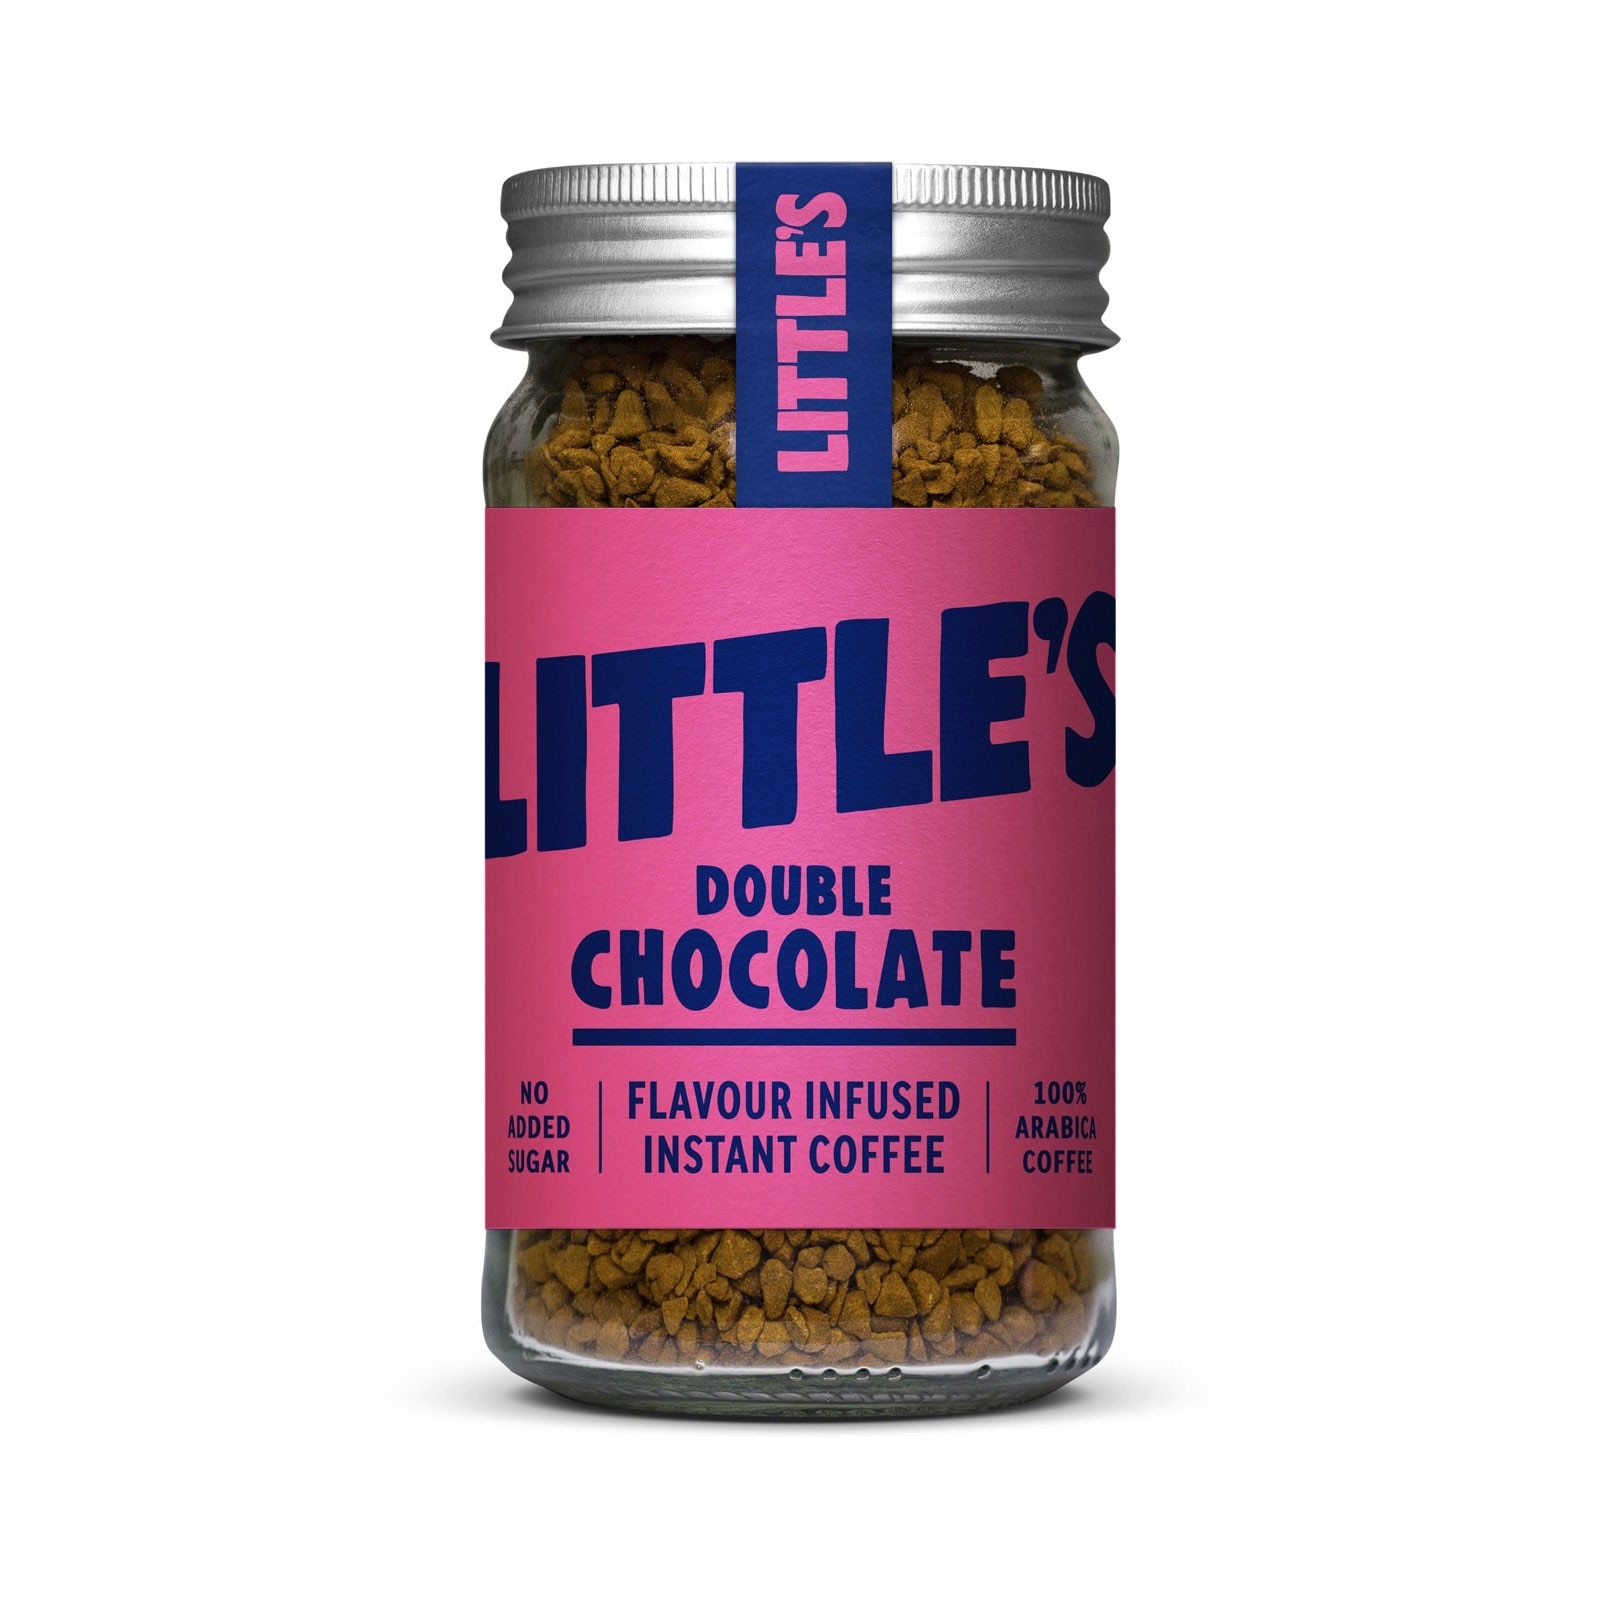 Little's Double Chocolate Instant Coffee